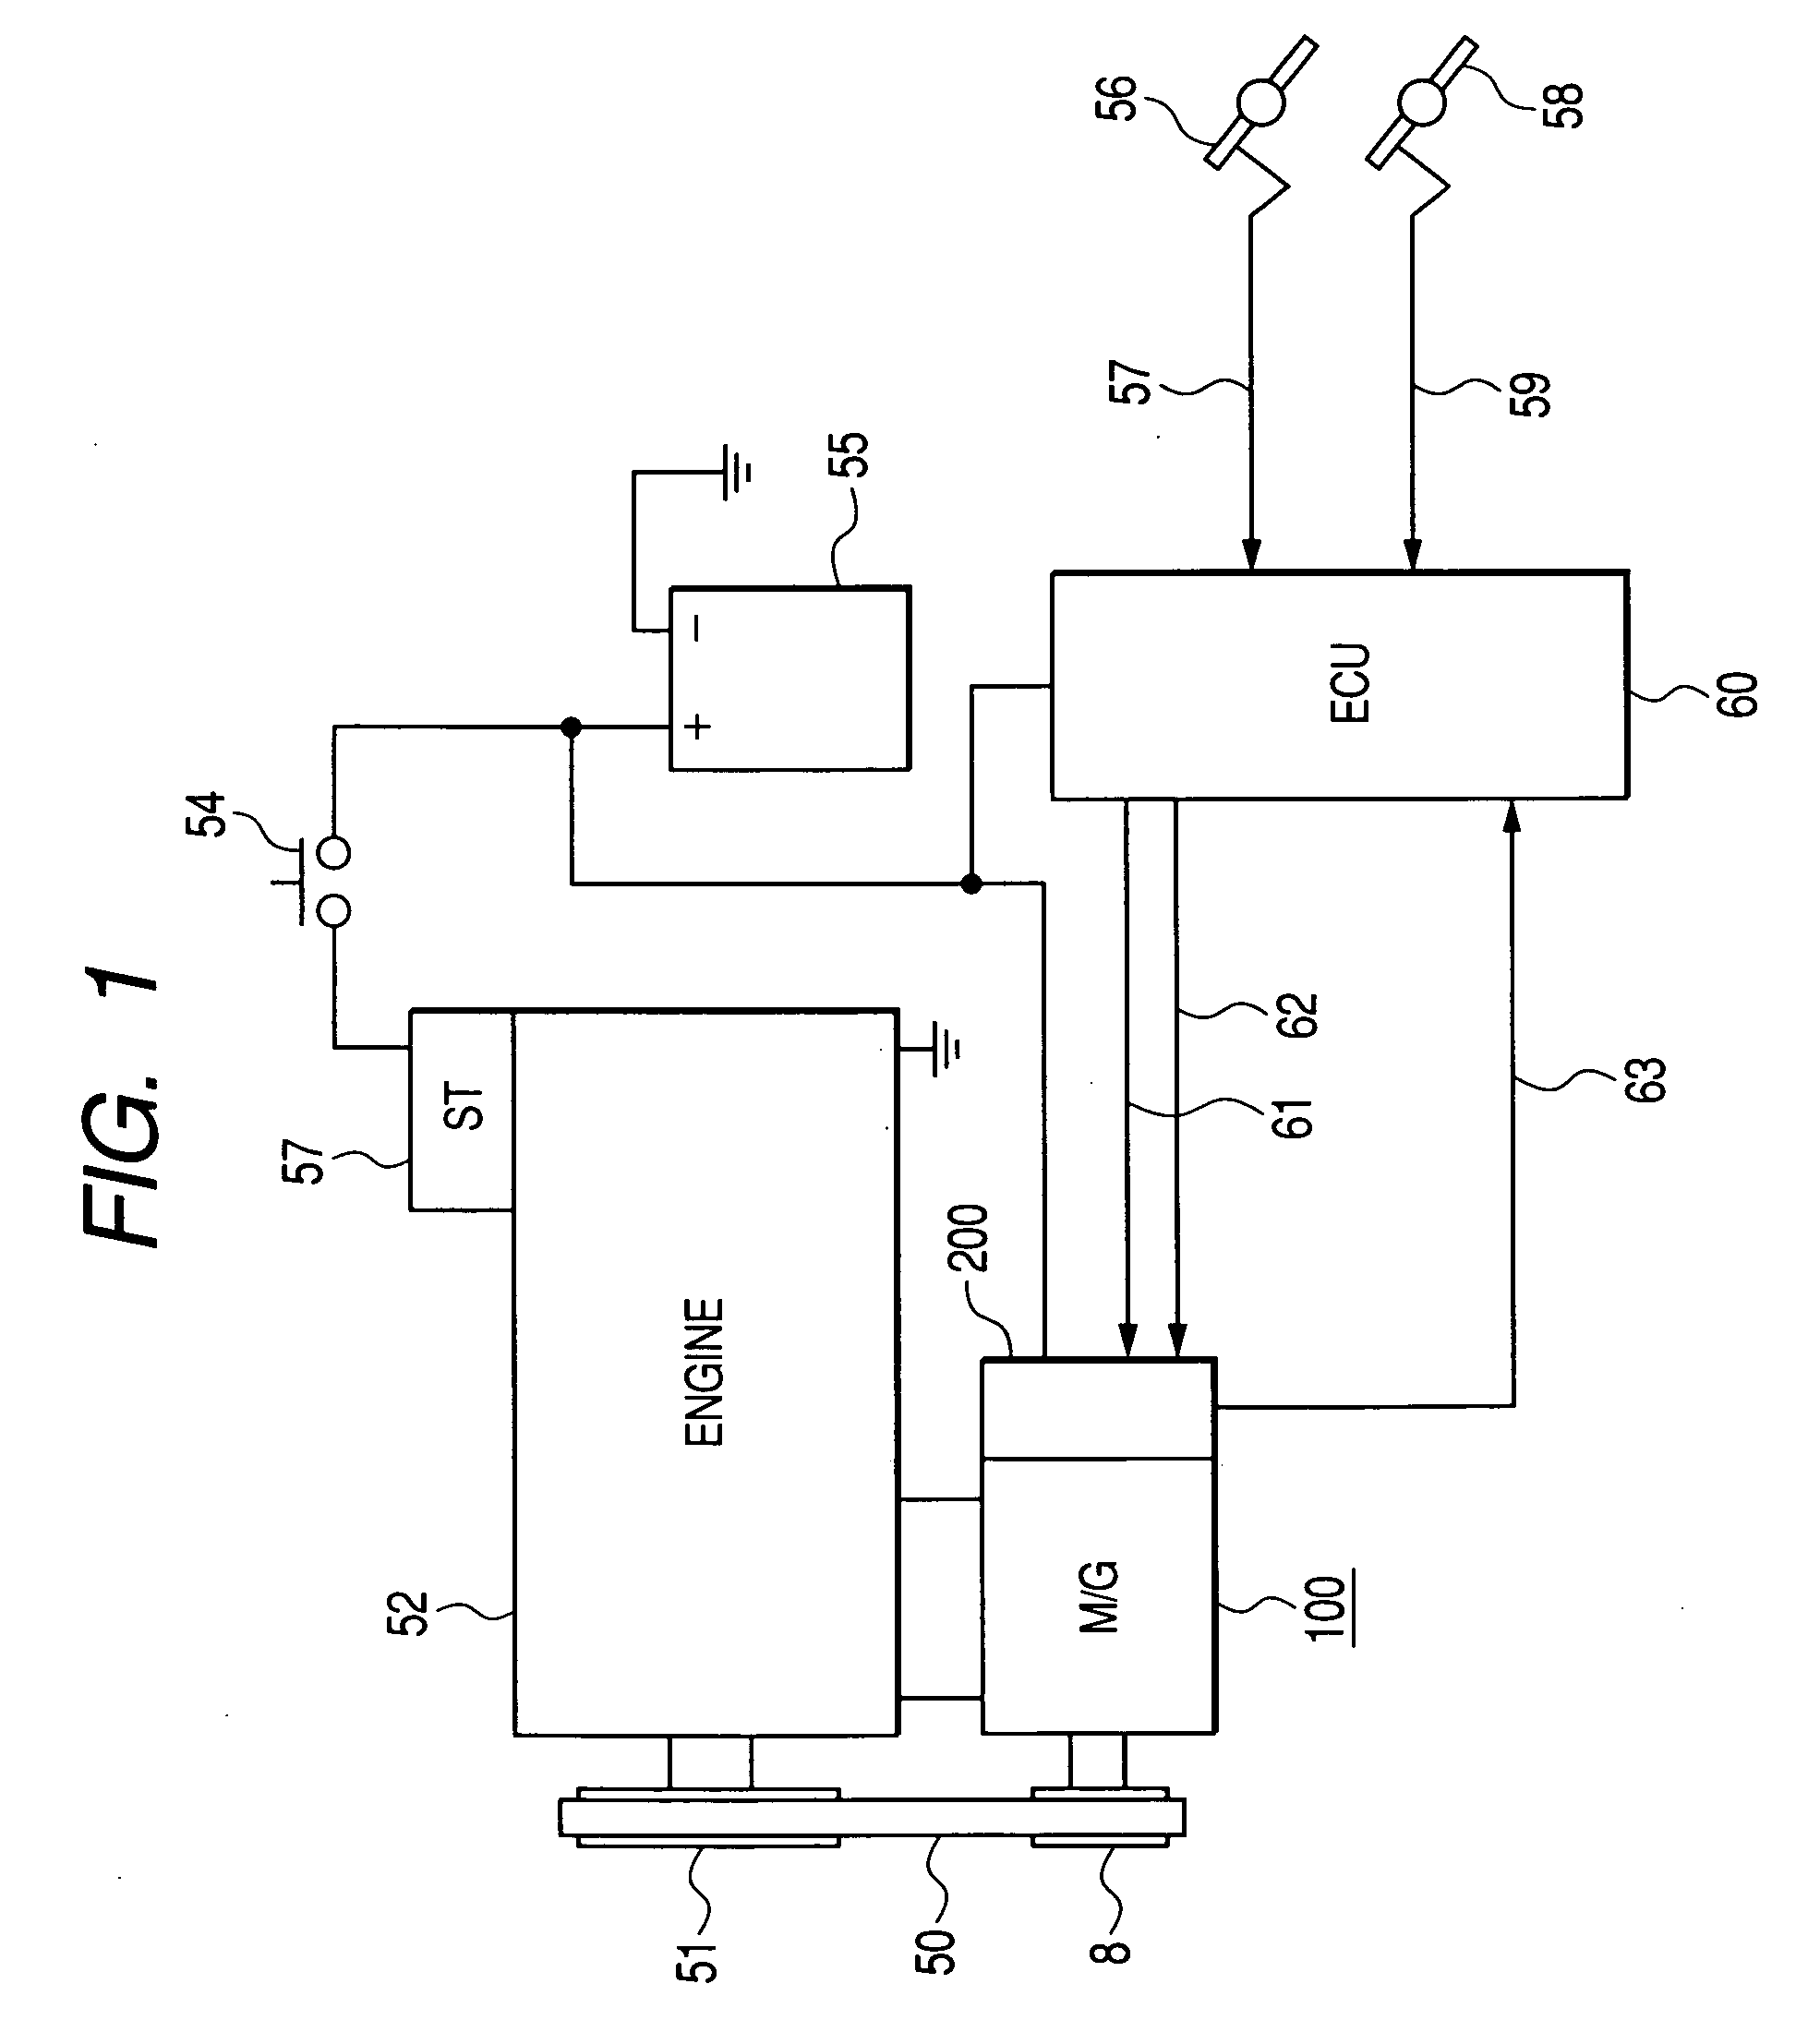 Driving/electric-power generating system for vehicle